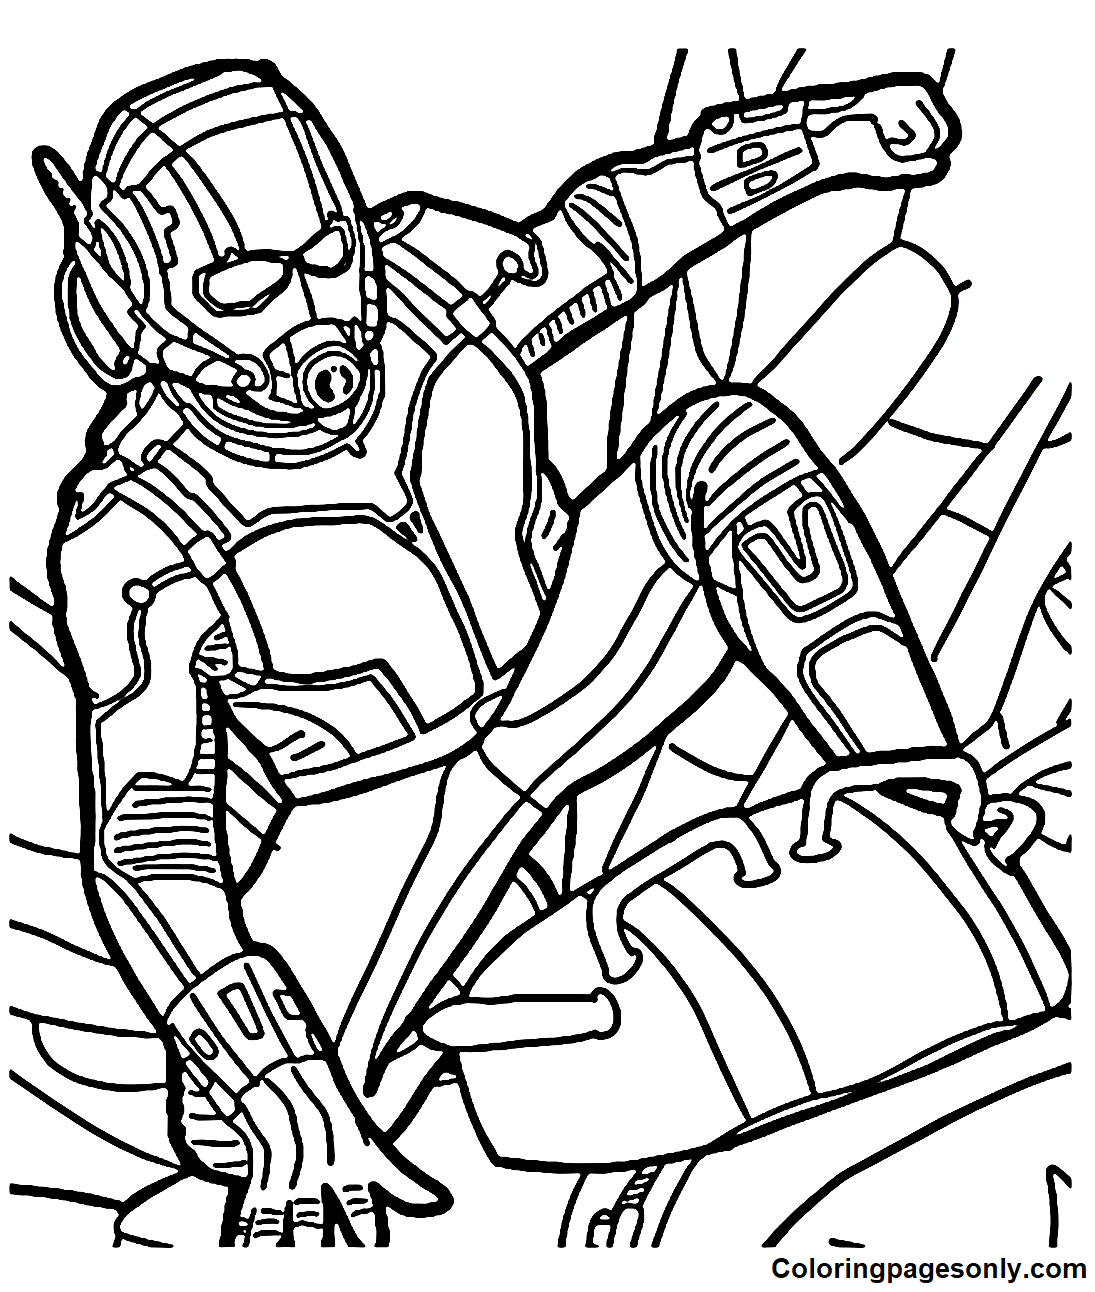 Ant-Man Superheroes Coloring Pages